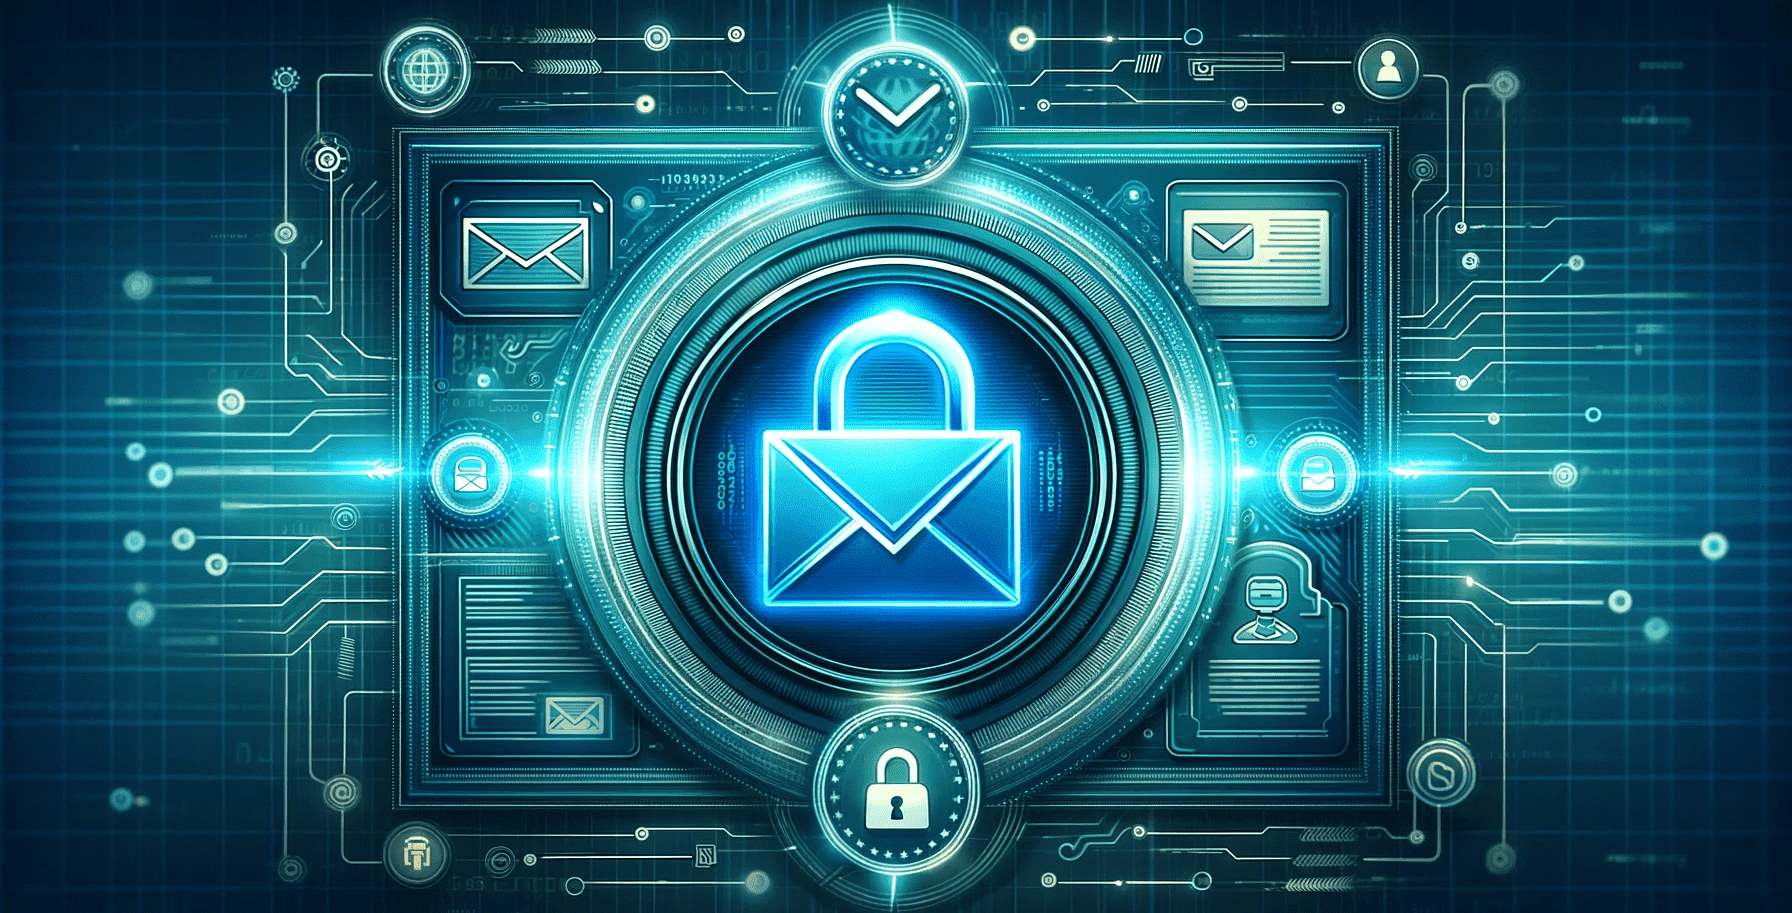 How to use SSL/TLS to secure your email communications